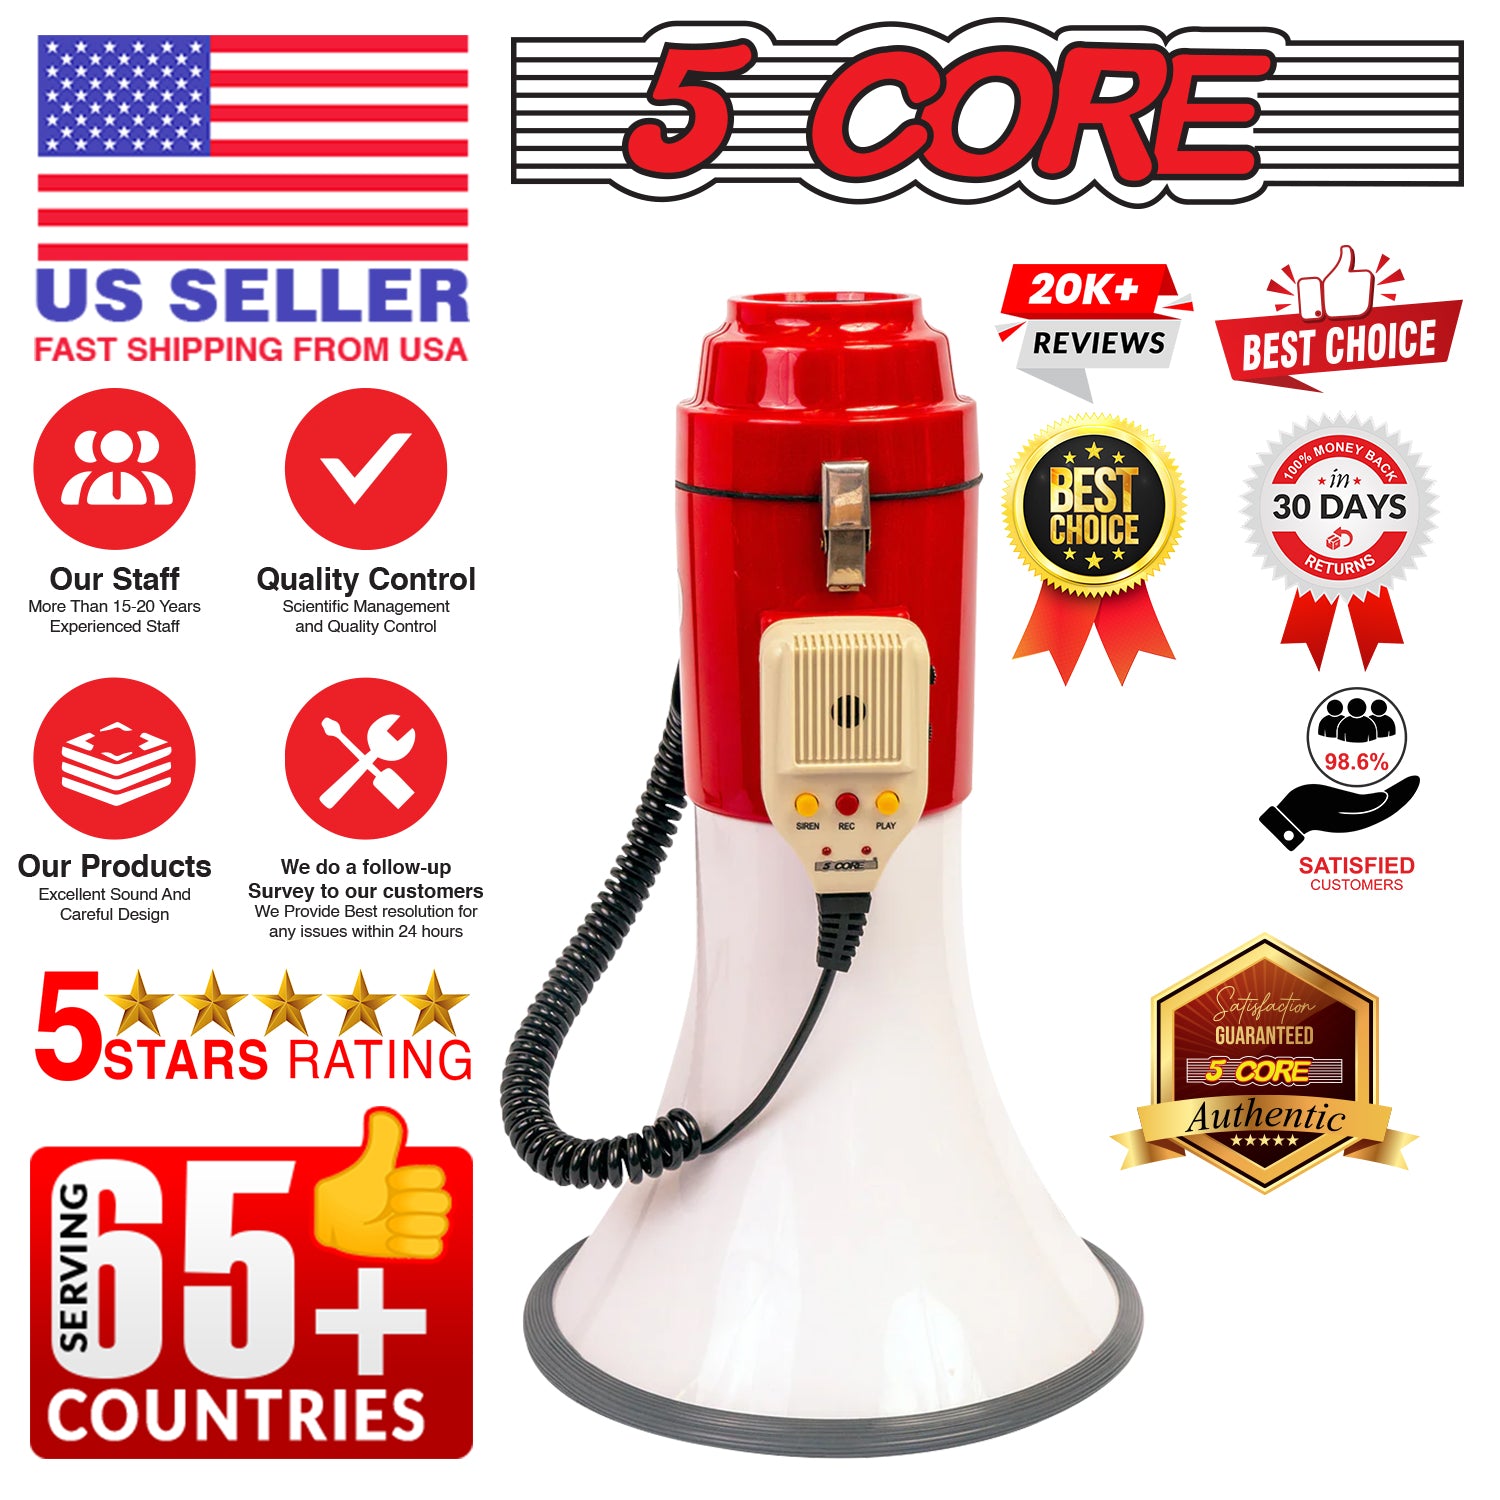 5 Core Megaphone Bull Horn 60W Loud Siren Noise Maker Professional Bullhorn Speaker Rechargeable w Handheld Mic Recording USB SD Card Adjustable Volume for Sports Speeches Events Emergencies -77SF